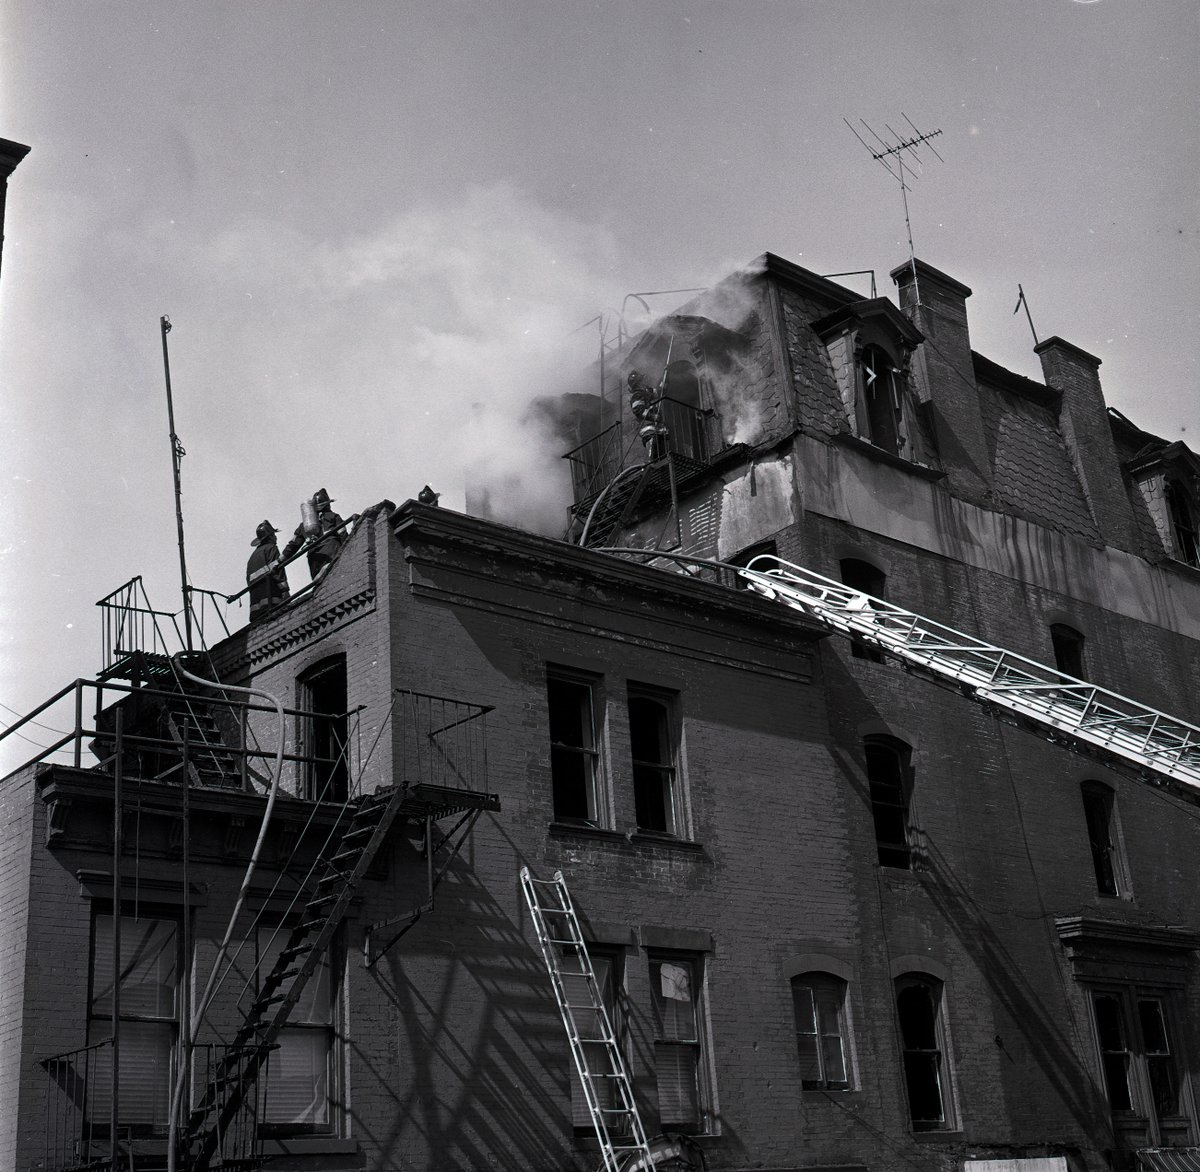 Today’s #ThrowbackThursday photo is from April 28, 1974, when firefighters responded to a second alarm fire at Bedford Avenue and Lafayette Street in Brooklyn. Learn more about FDNY history with the @nycfiremuseum Throwback Podcast, now available on Apple, Spotify & Google Play.